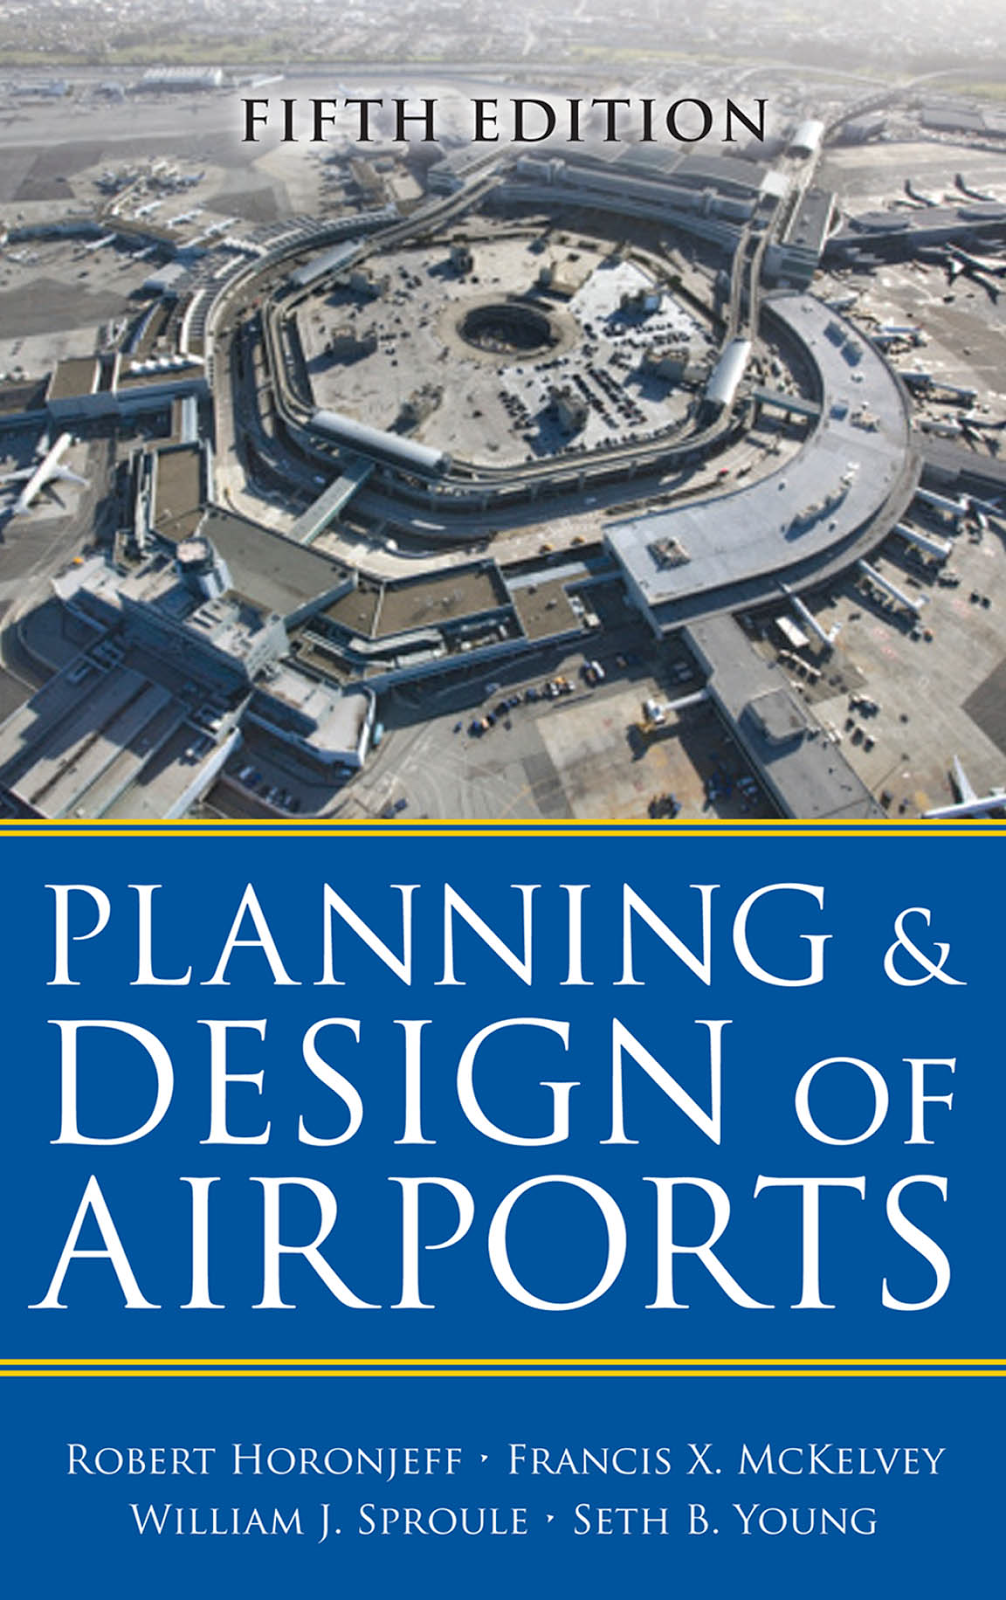 Planning and Design of Airports (5th Edition) by Robert Horonjeff,Francis X. McKelvey,William J. Sproule,Seth B. Young